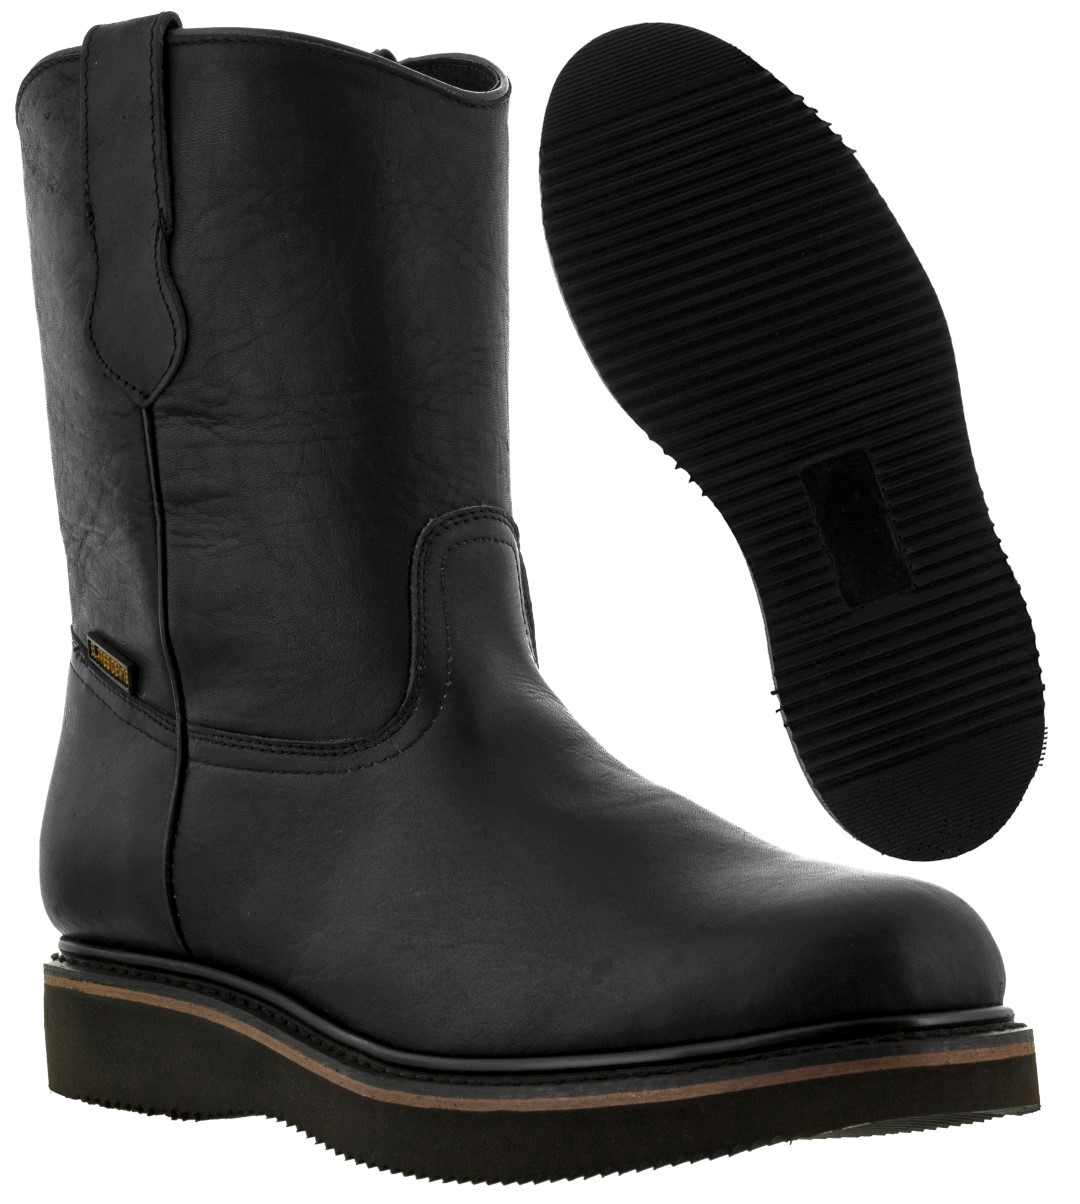 slip and oil resistant boots